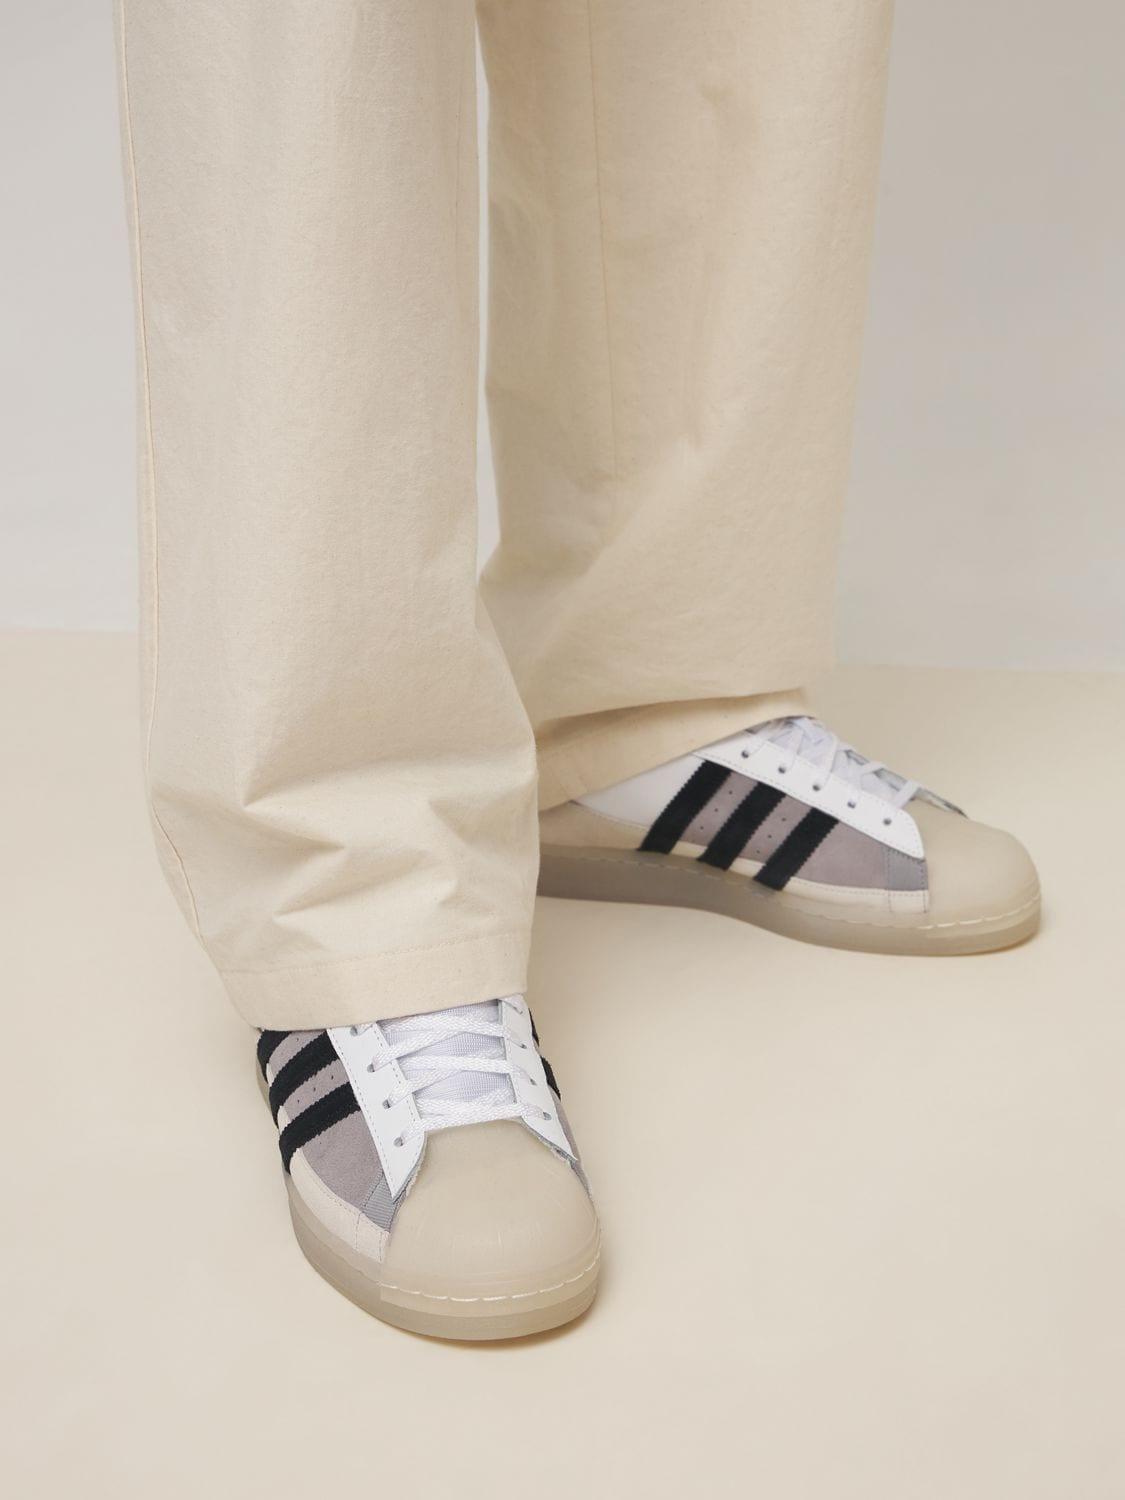 adidas in pelle bianche